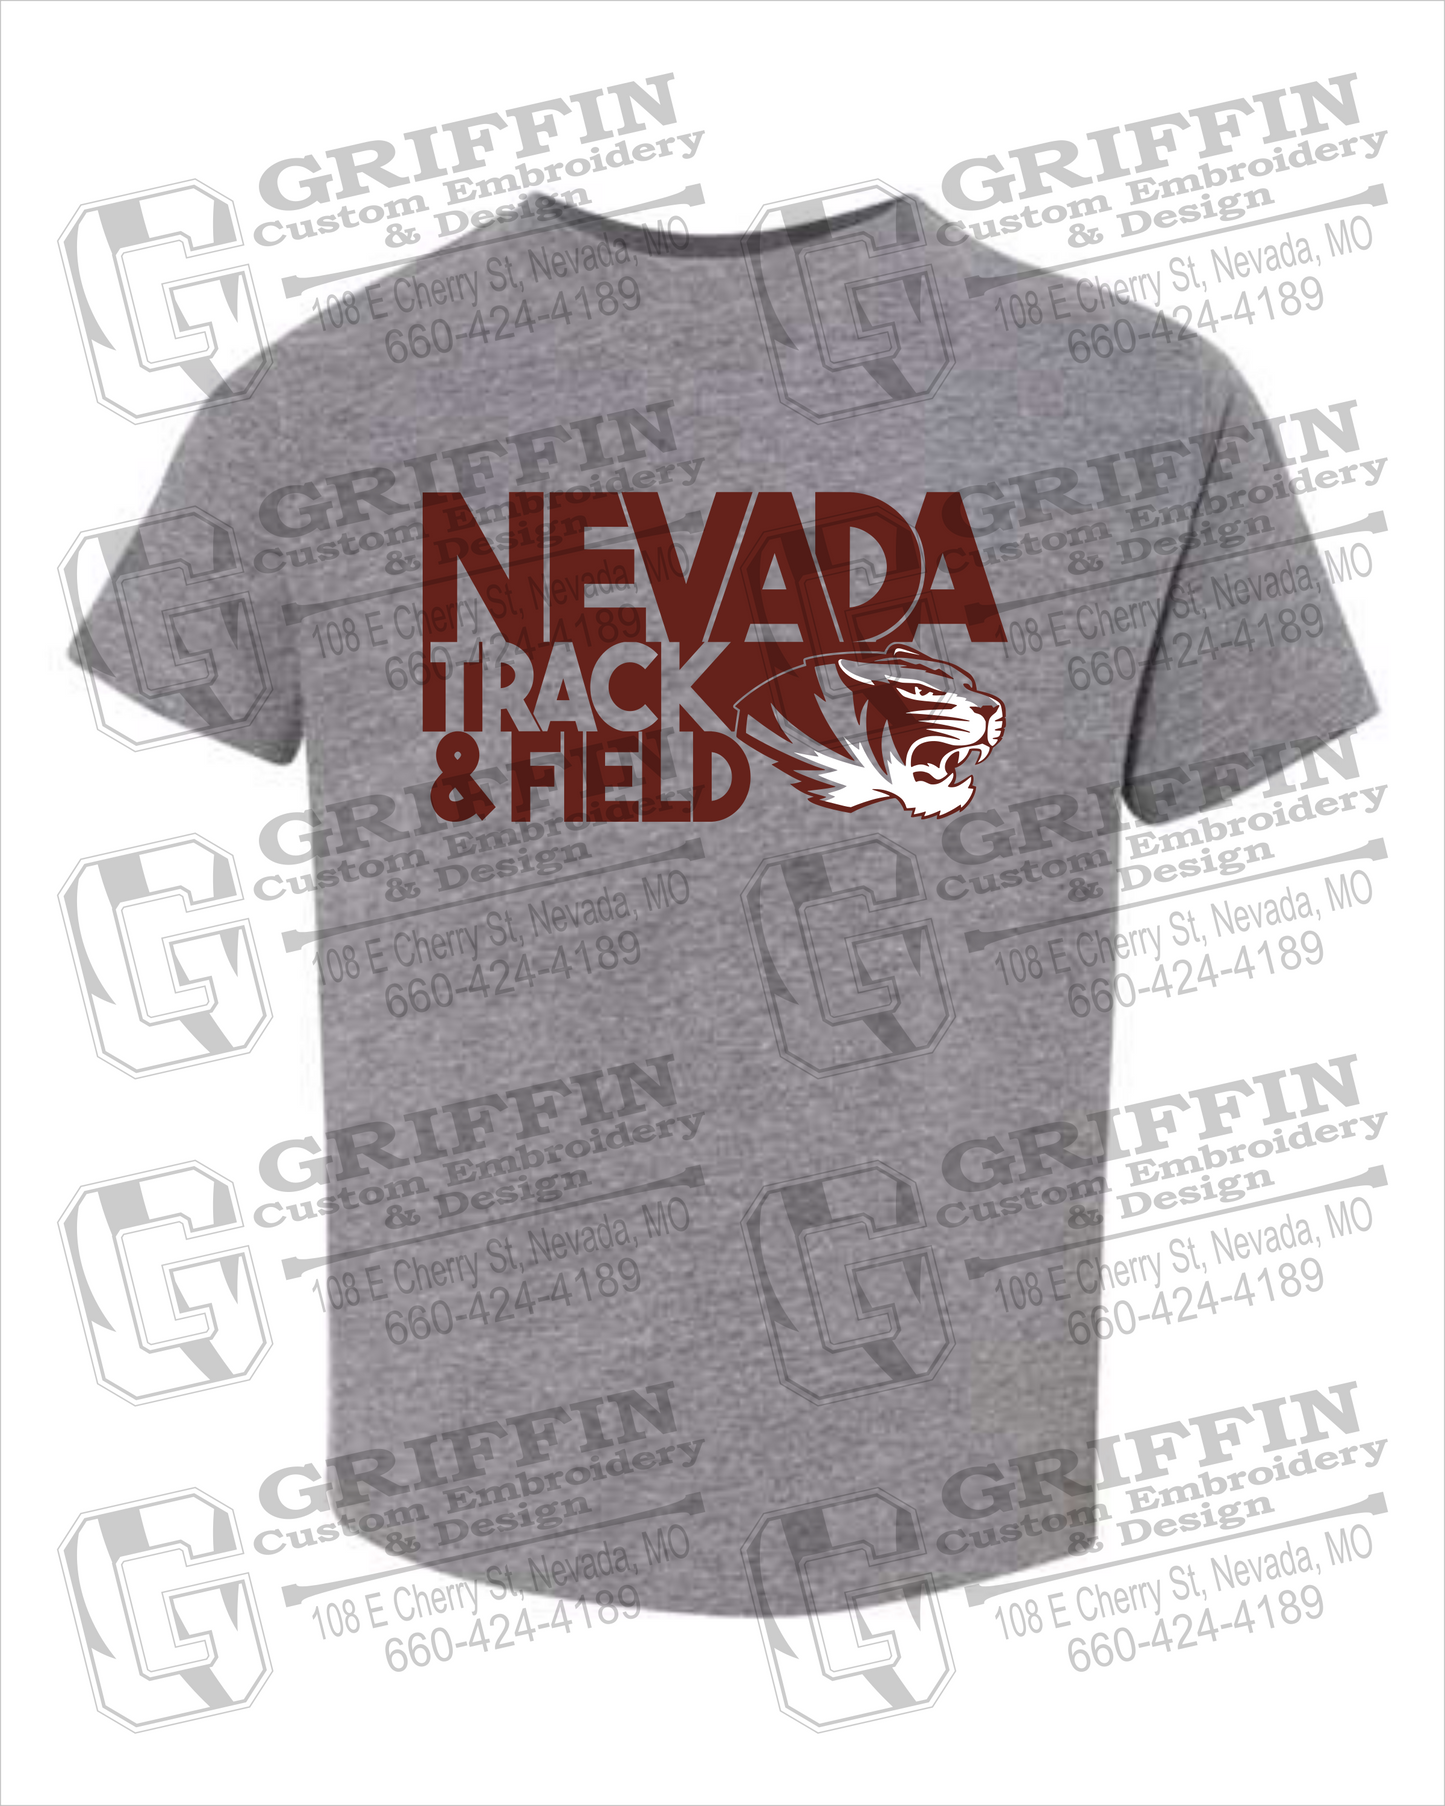 Nevada Tigers 24-Q Toddler/Infant T-Shirt - Track & Field